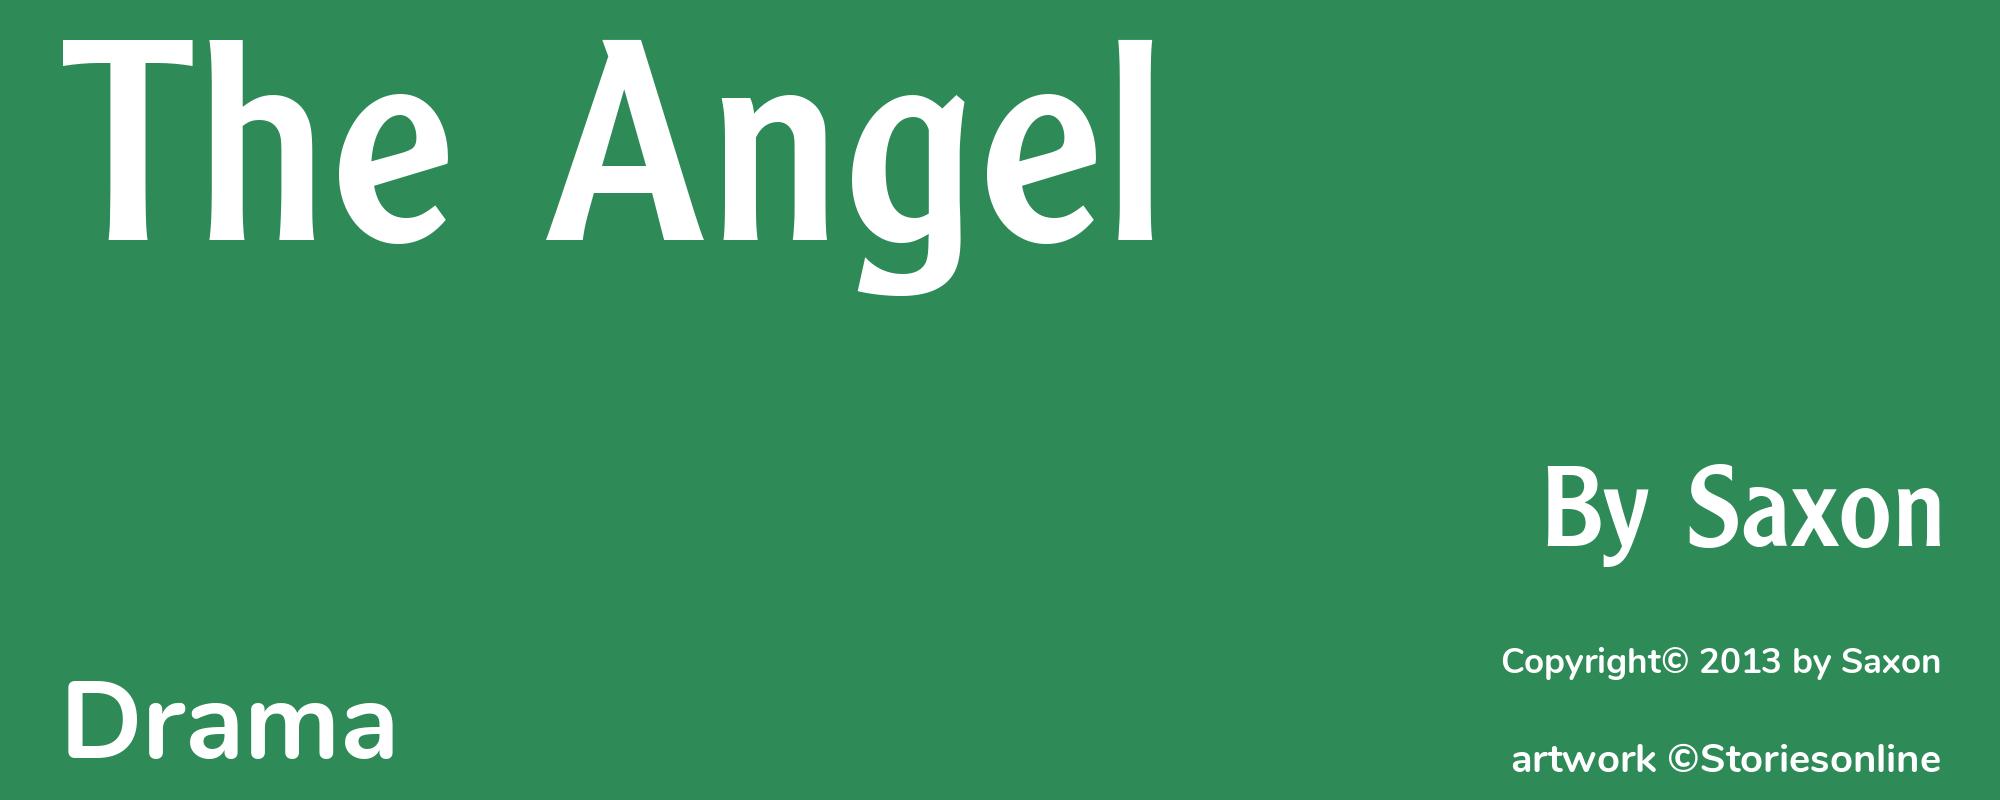 The Angel - Cover